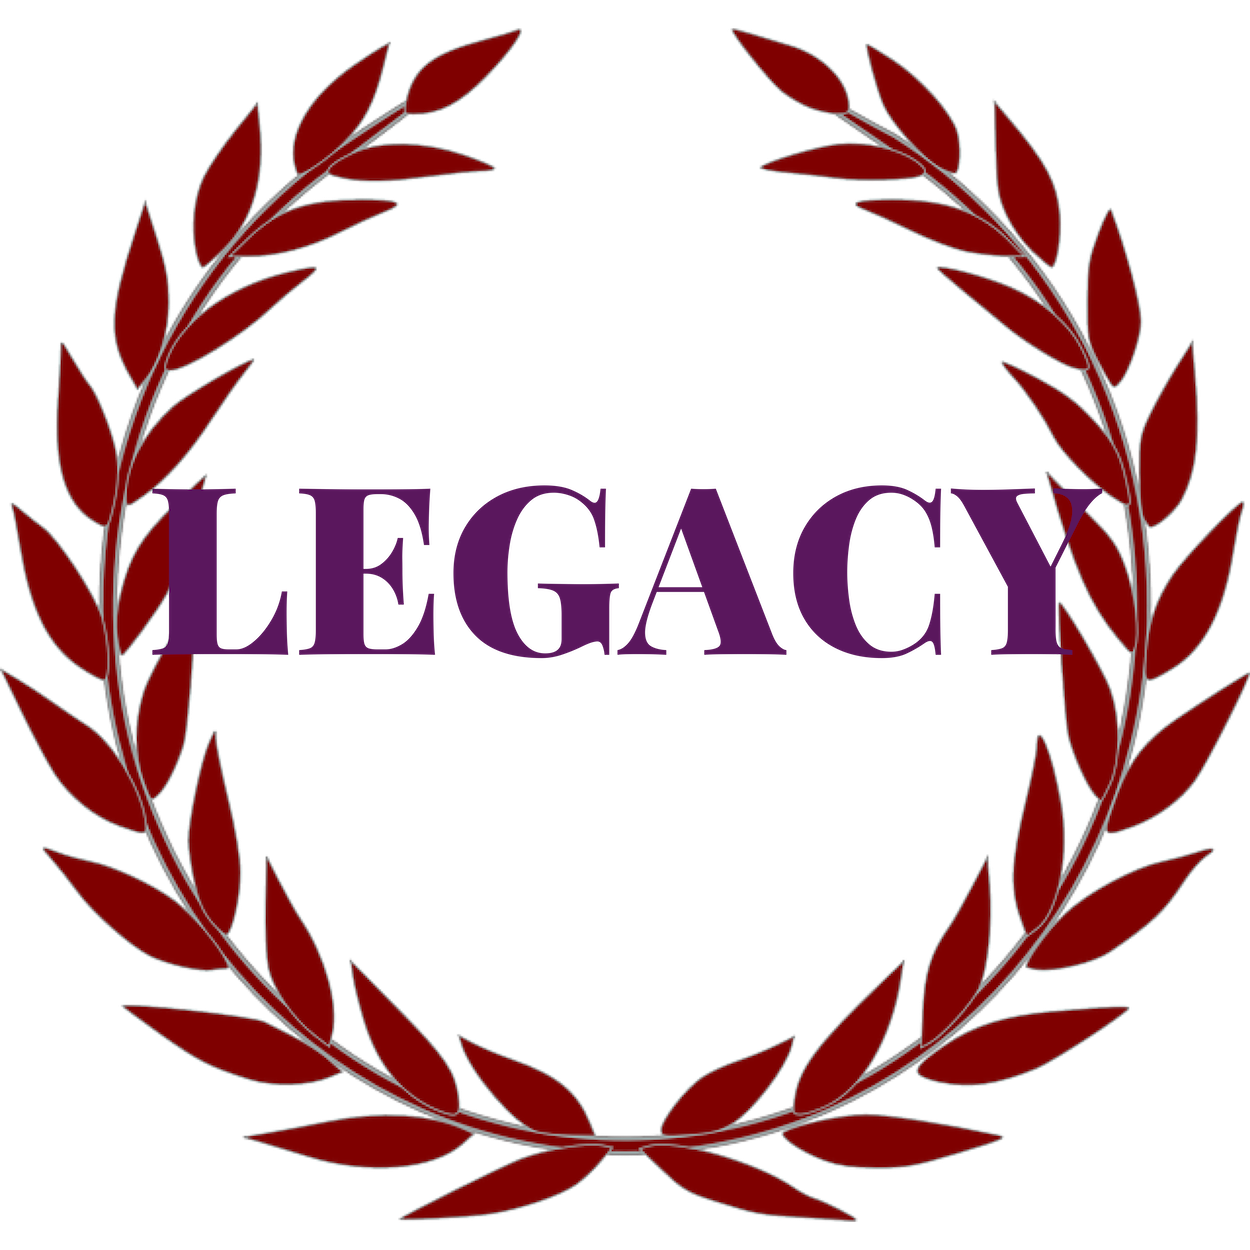 Legacy in the Making Show